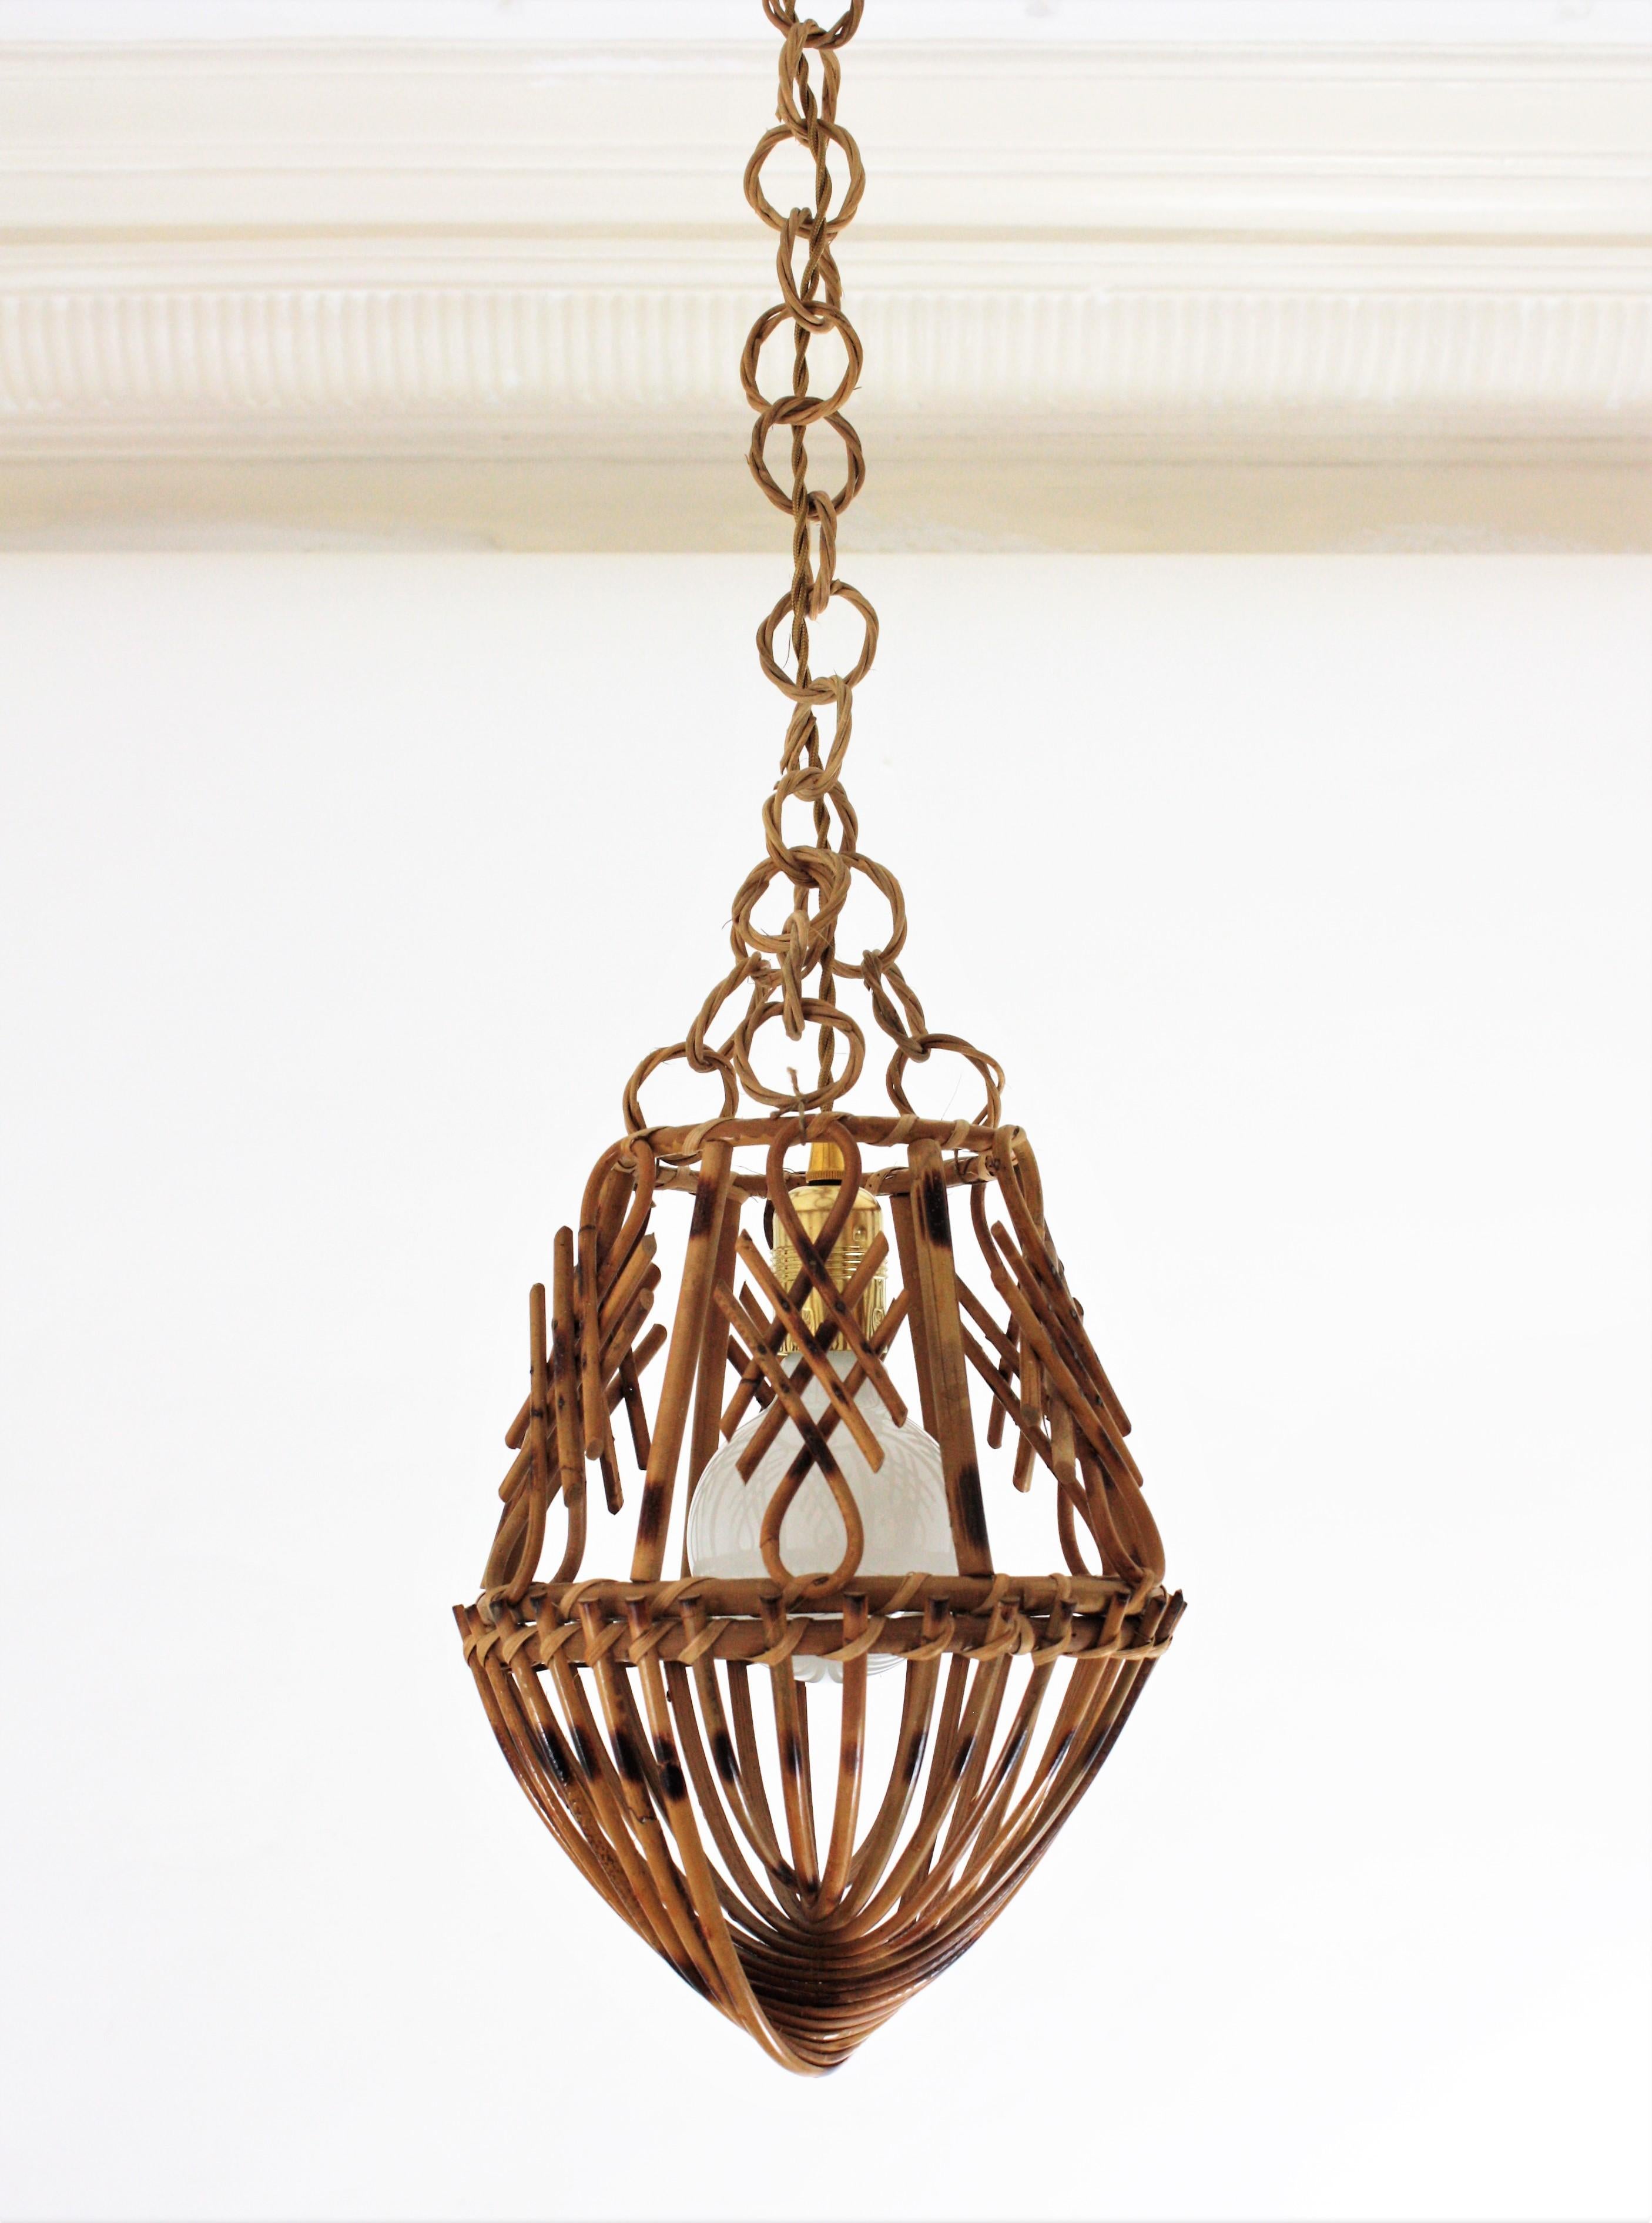 Rare midcentury chinoiserie style handcrafted rattan and wicker pendant lamp. France, 1950s.
This lantern is all made by hand with rattan canes. The shade is comprised by a rattan structure with chinoserie decorations and a twisted bottom made with